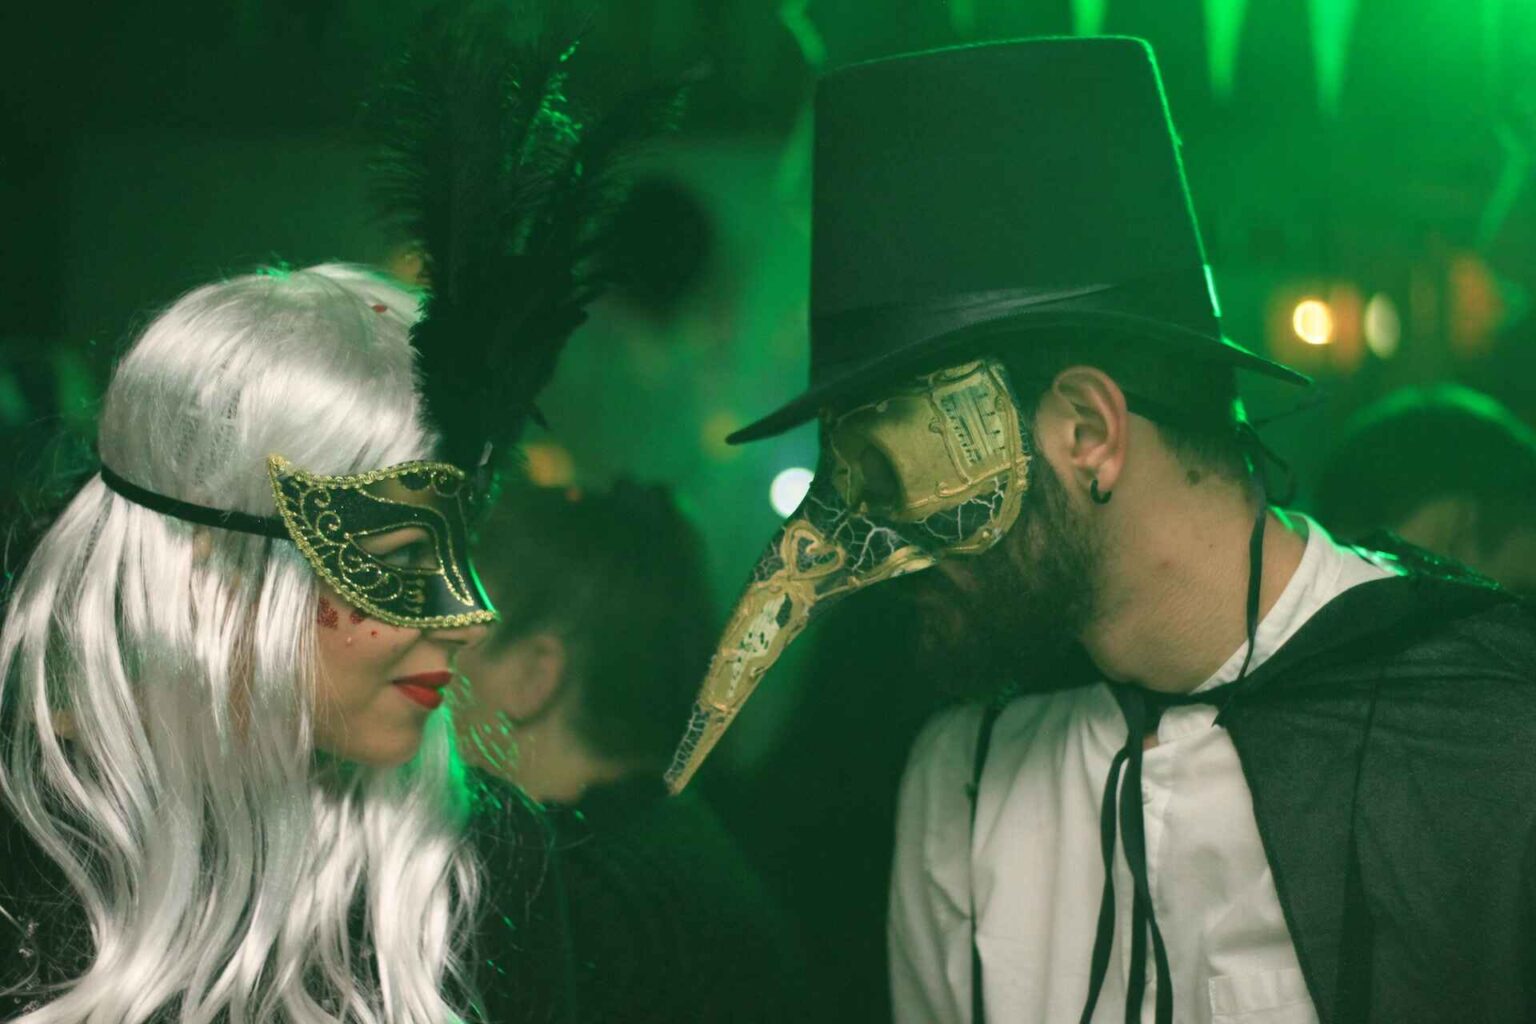 Costumed couple gazing at each other from behind their masks.